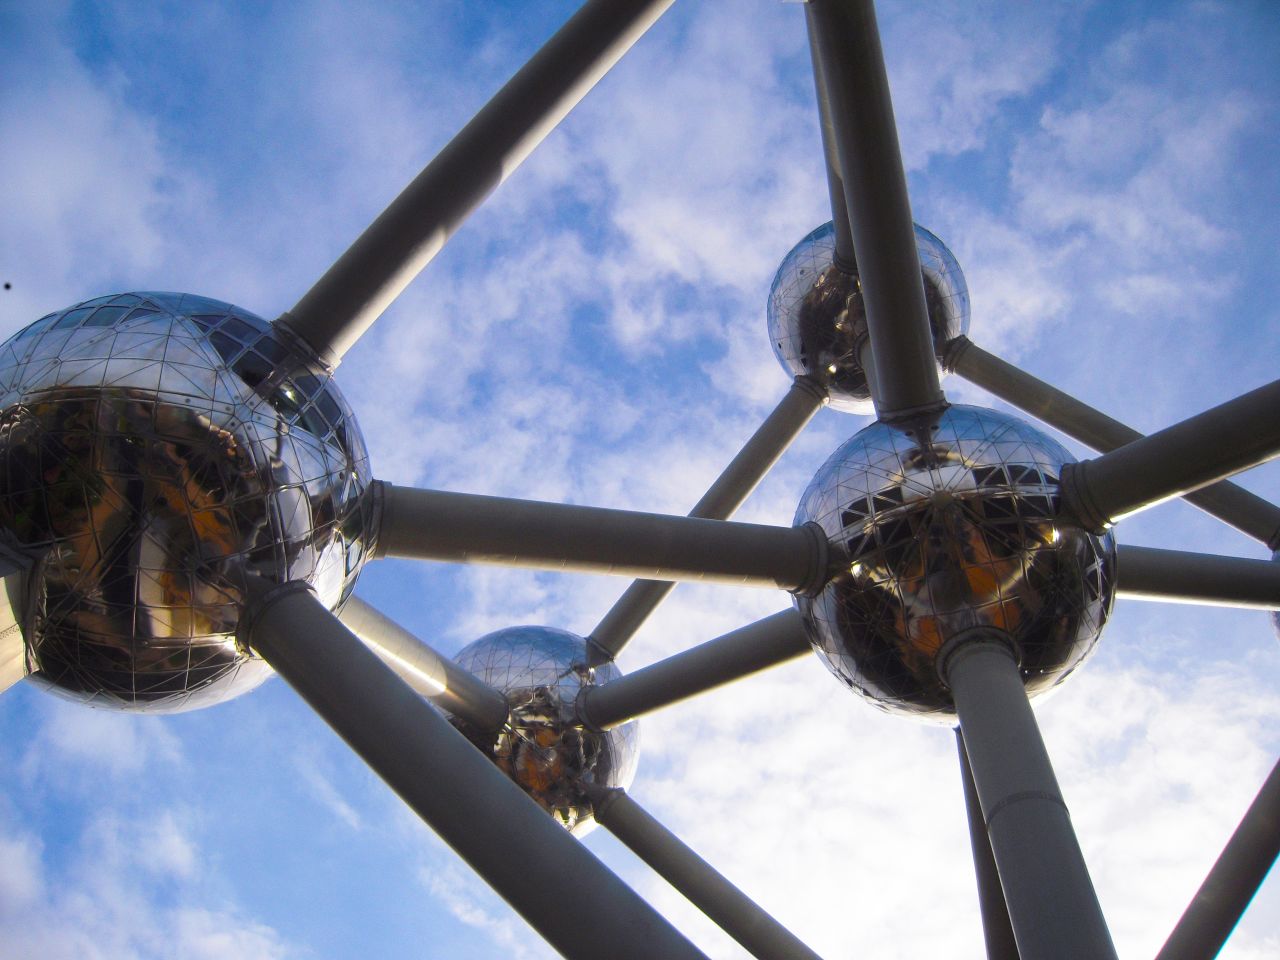 The Atomium in Brussels, Belgium, conjured the future "with a world then obsessed with the atom and the specter of an atomic future," says California photographer <a href="http://ireport.cnn.com/docs/DOC-1128013">George Kreif</a>. The structure was built for the 1958 World's Fair.